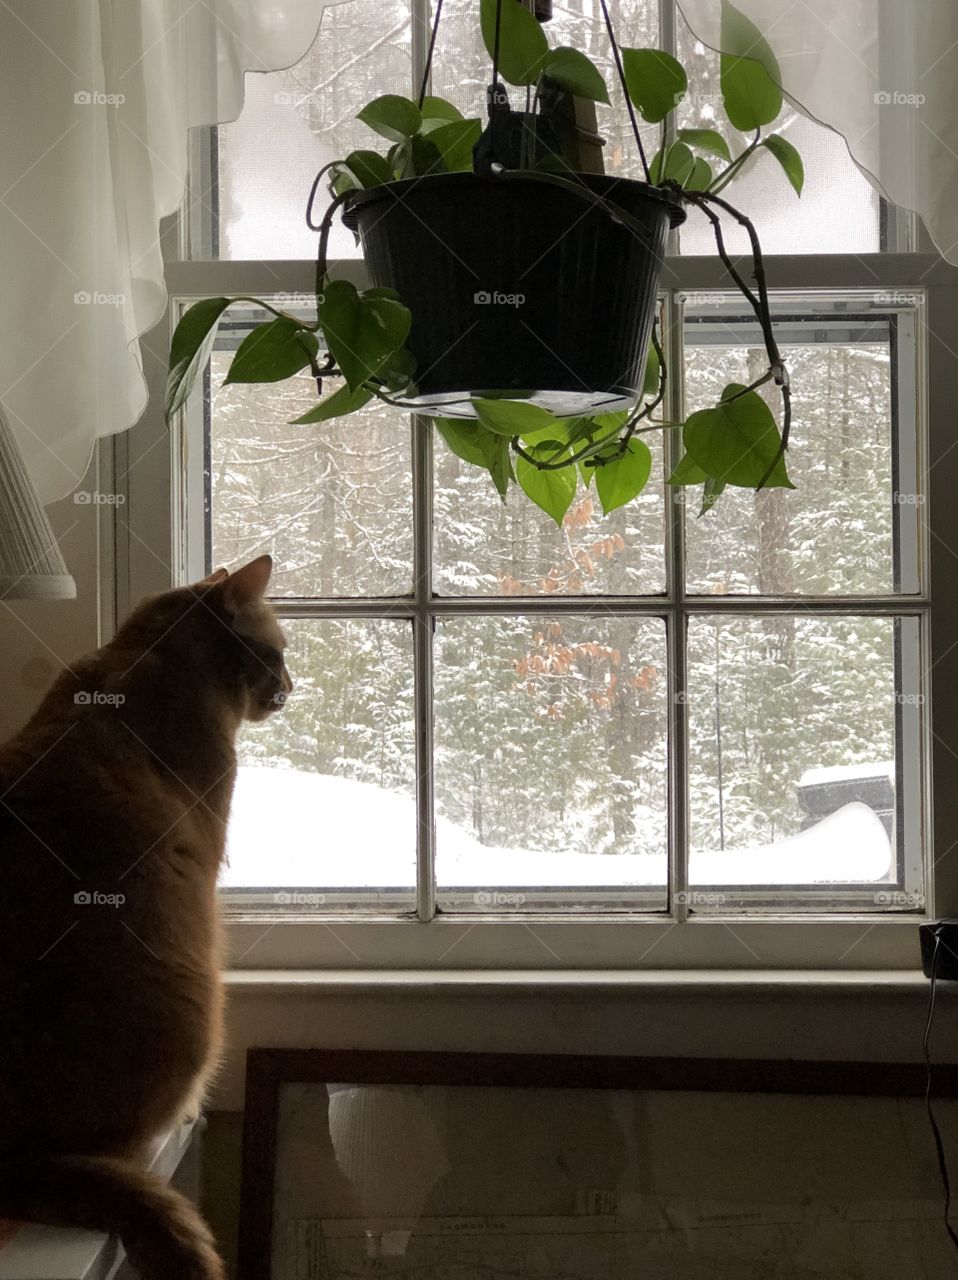 Relaxing and staying warm in the house with the cat as we watch the snow fall in the backyard through a glass window in the comfort of the livingroom.